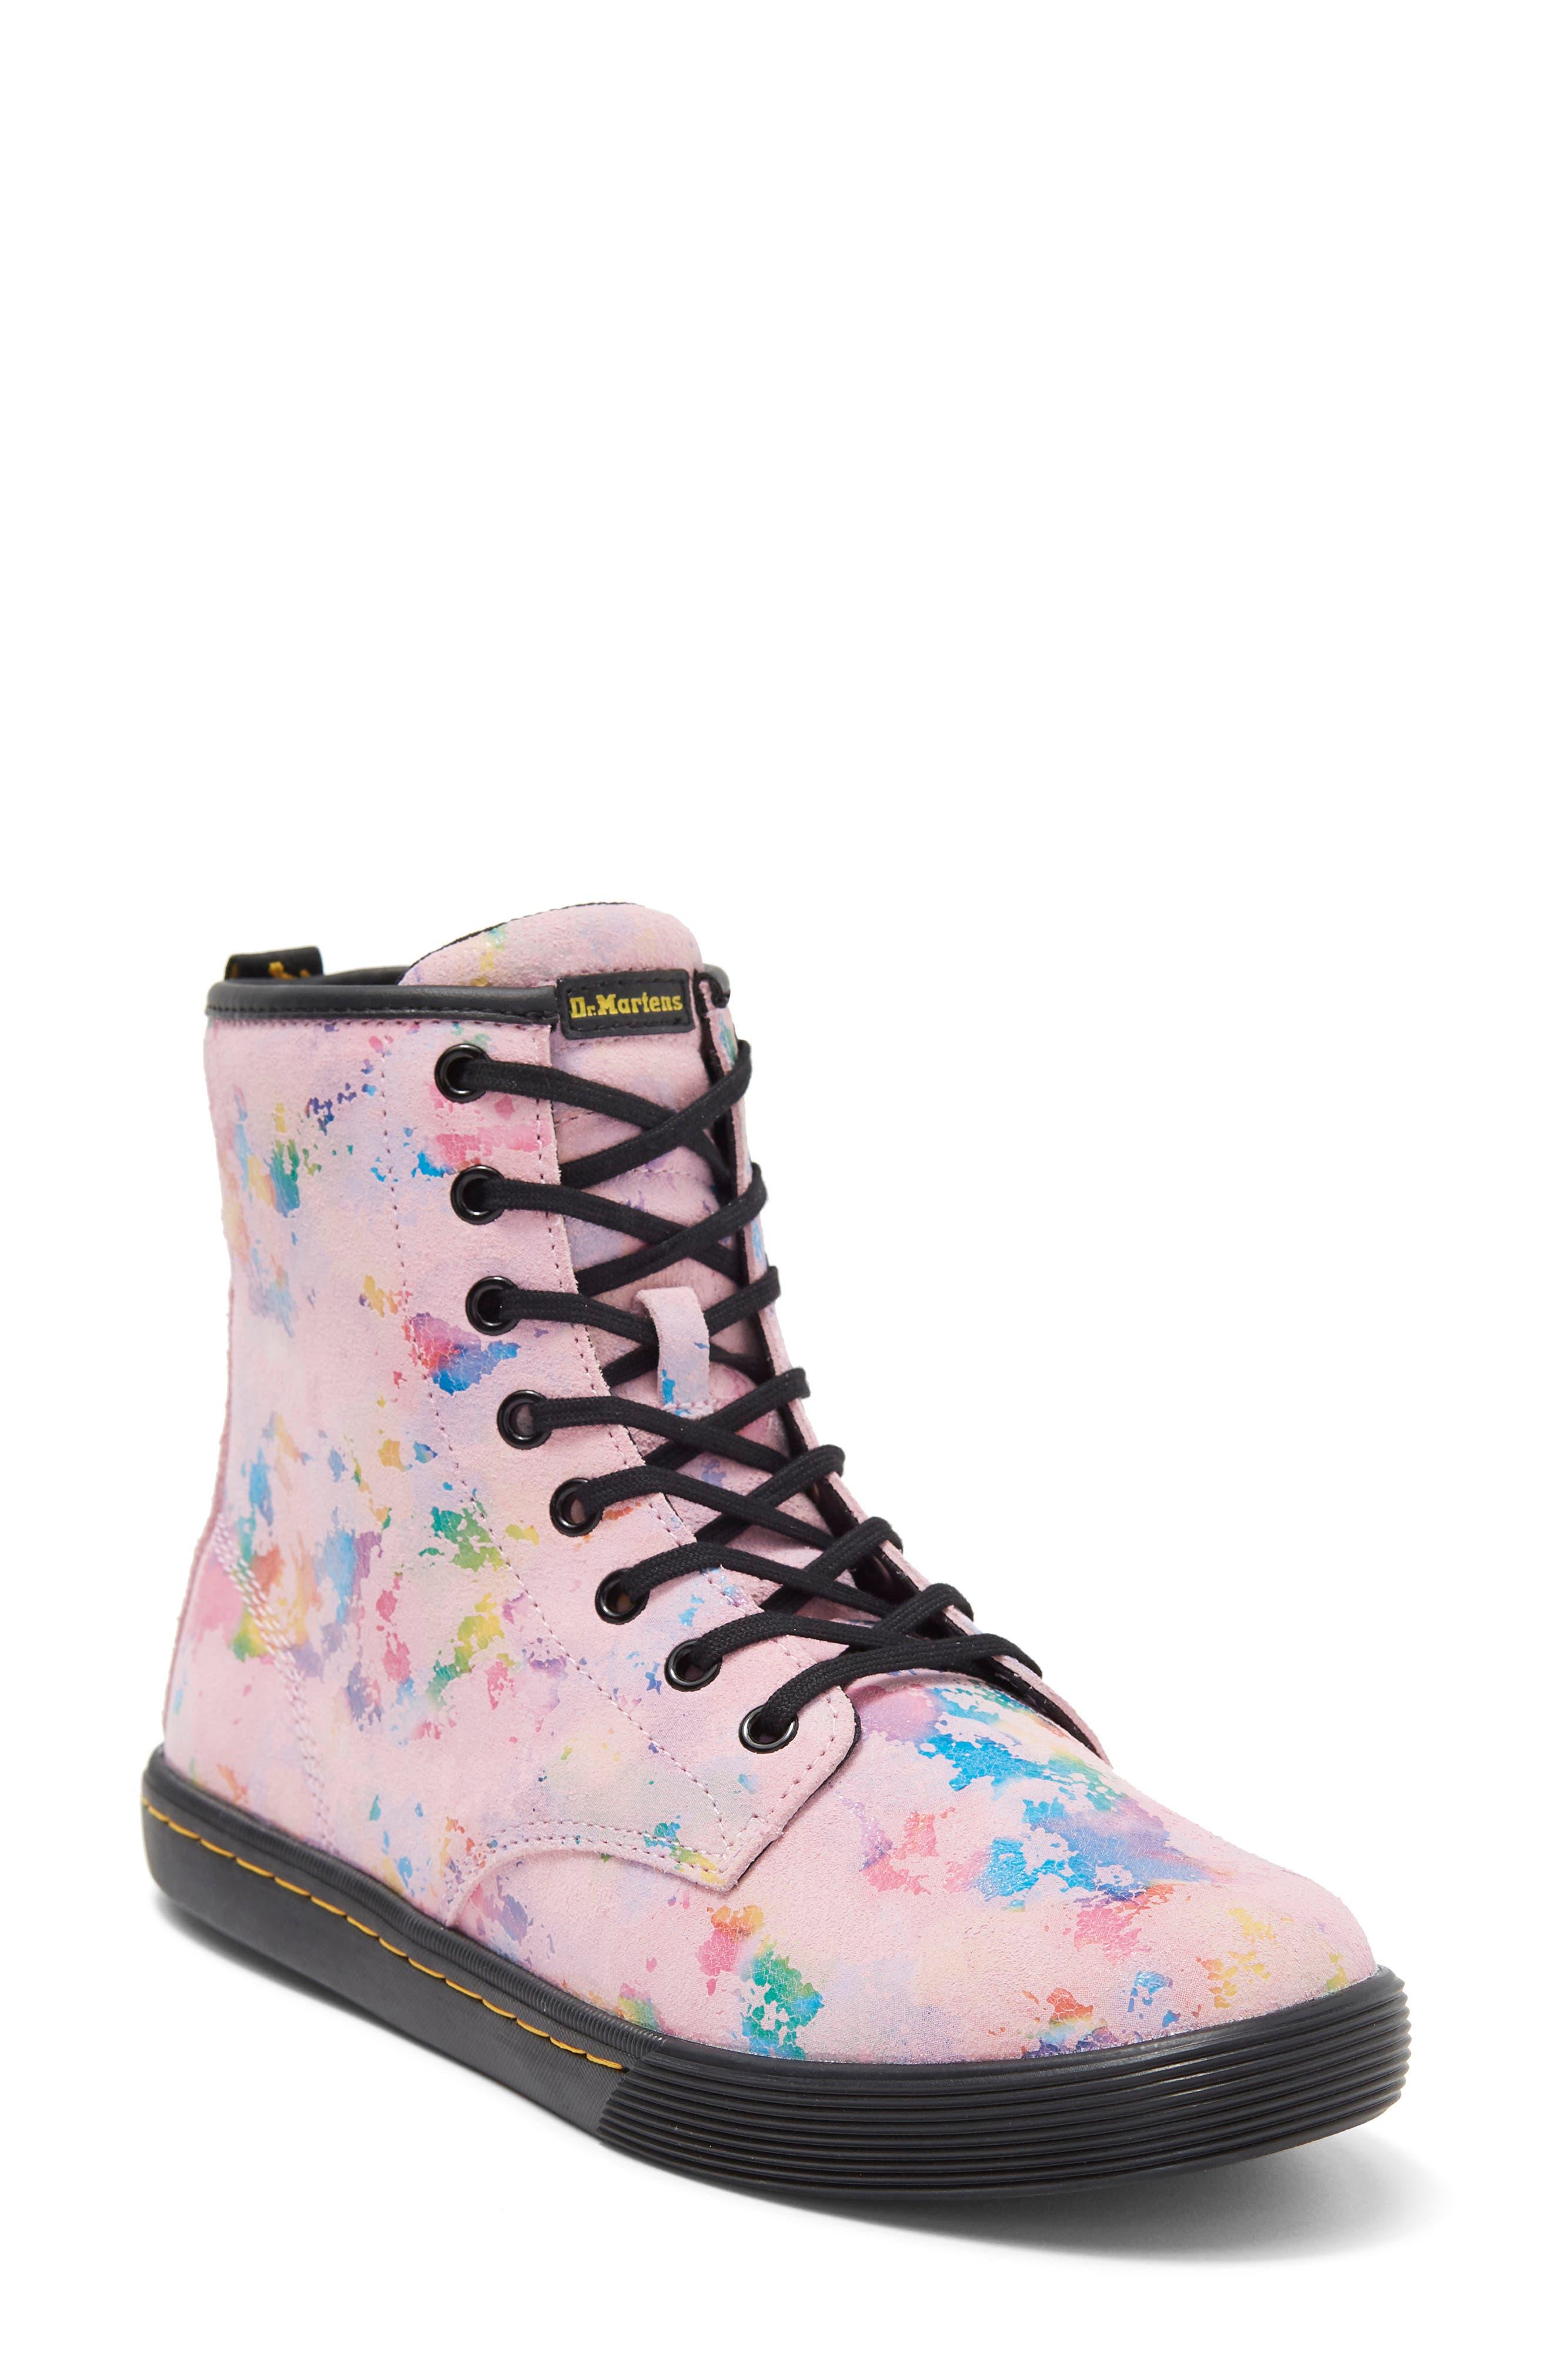 Dr. Martens Sheridan Rainbow Suede Boot in Pink | Lyst